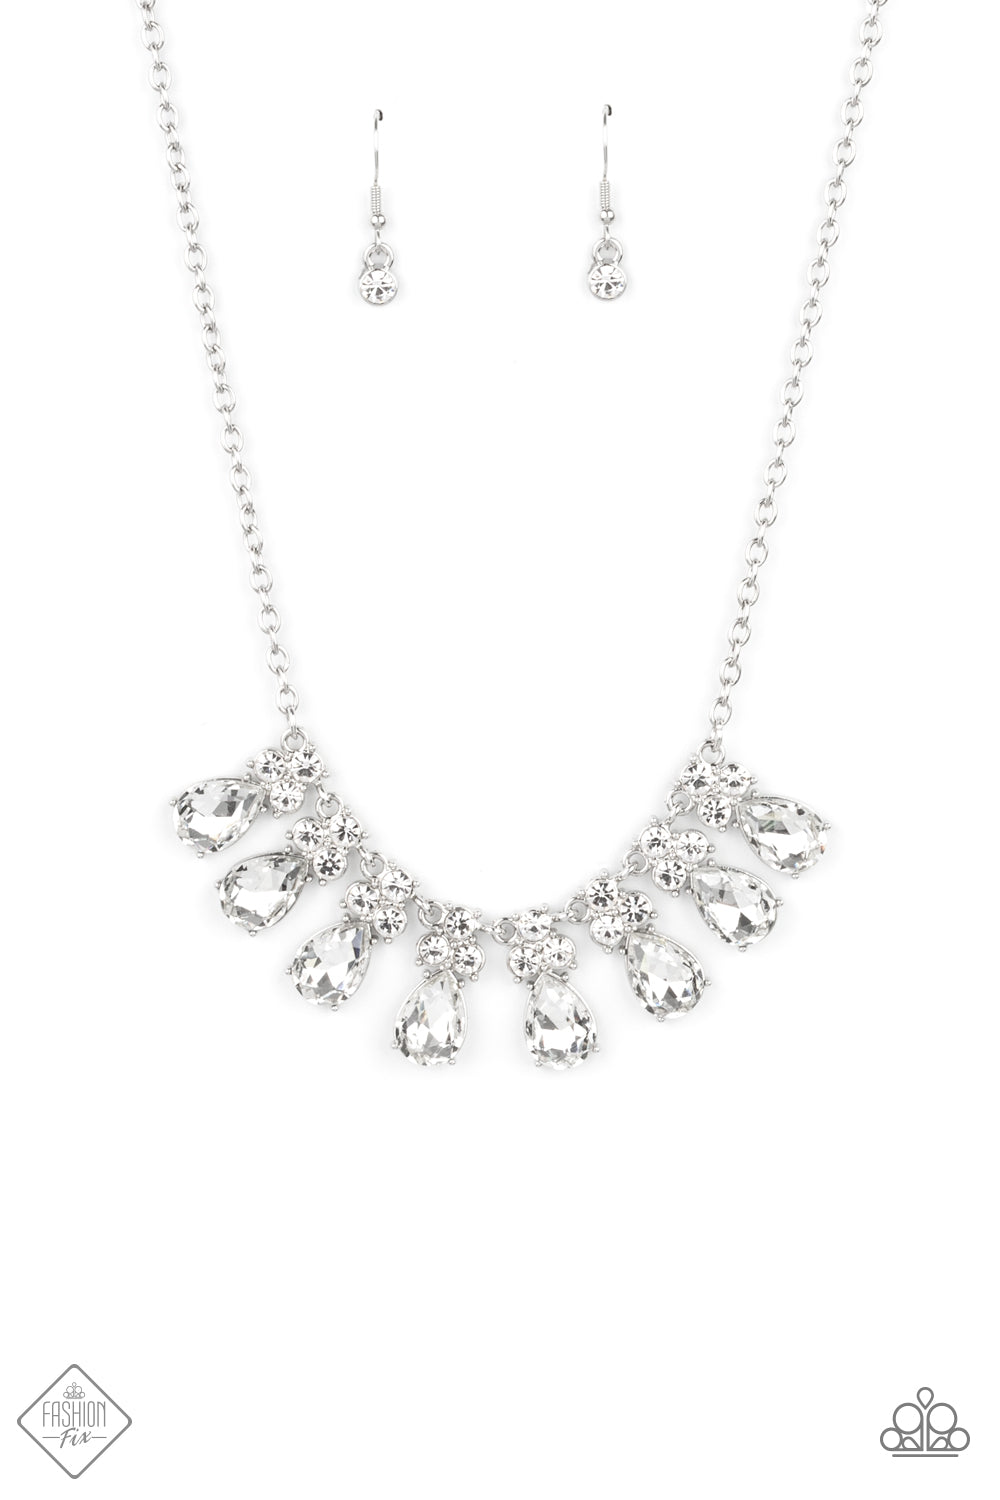 Paparazzi Accessories - Sparkly Ever After White Necklace Fashion Fix May 2021 #FFA0521